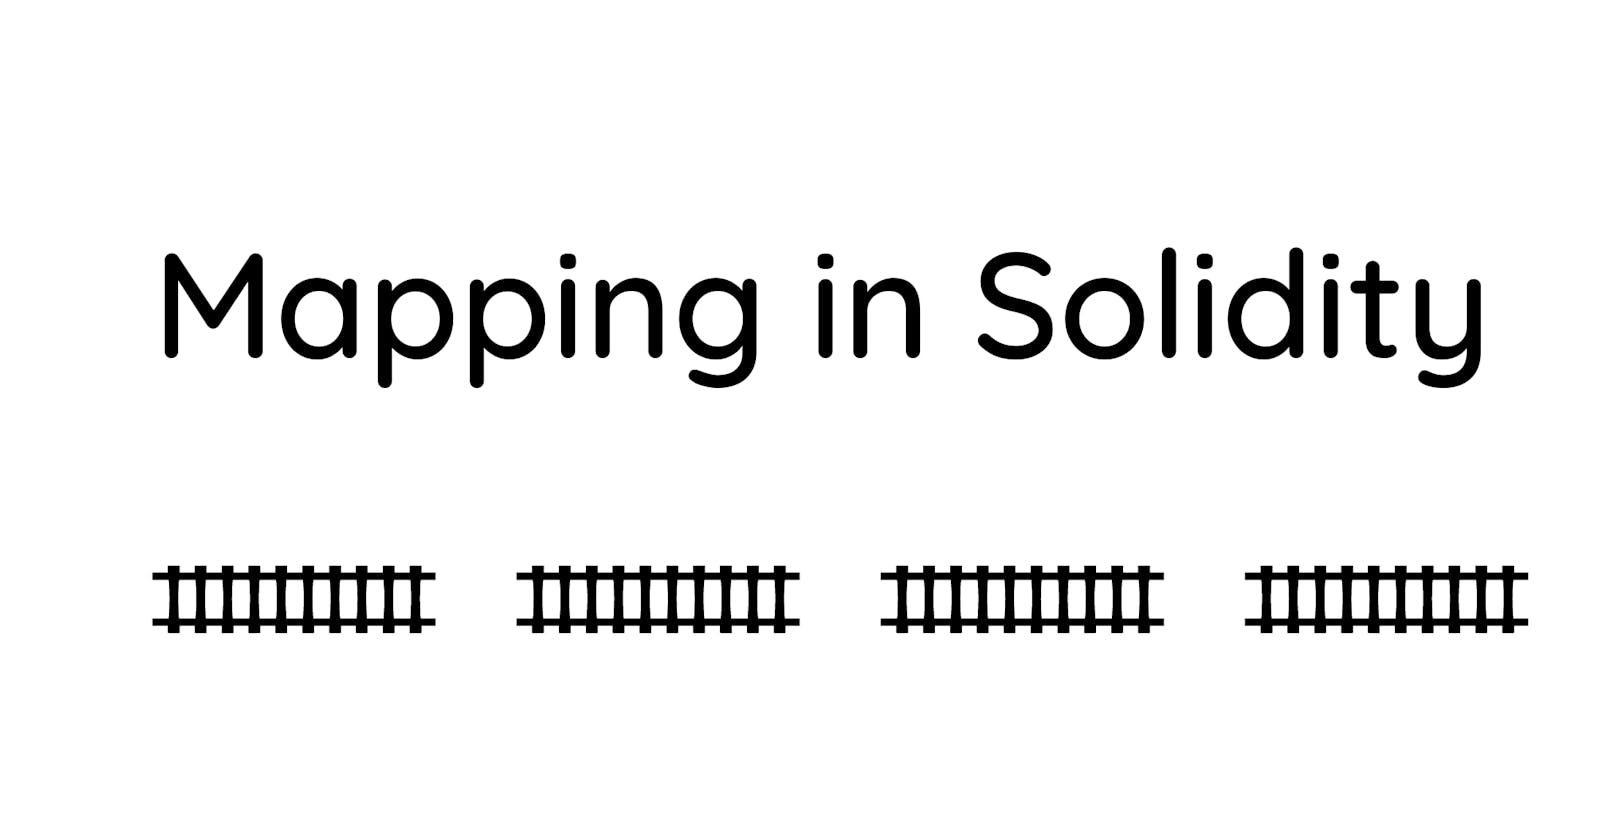 Mapping in solidity